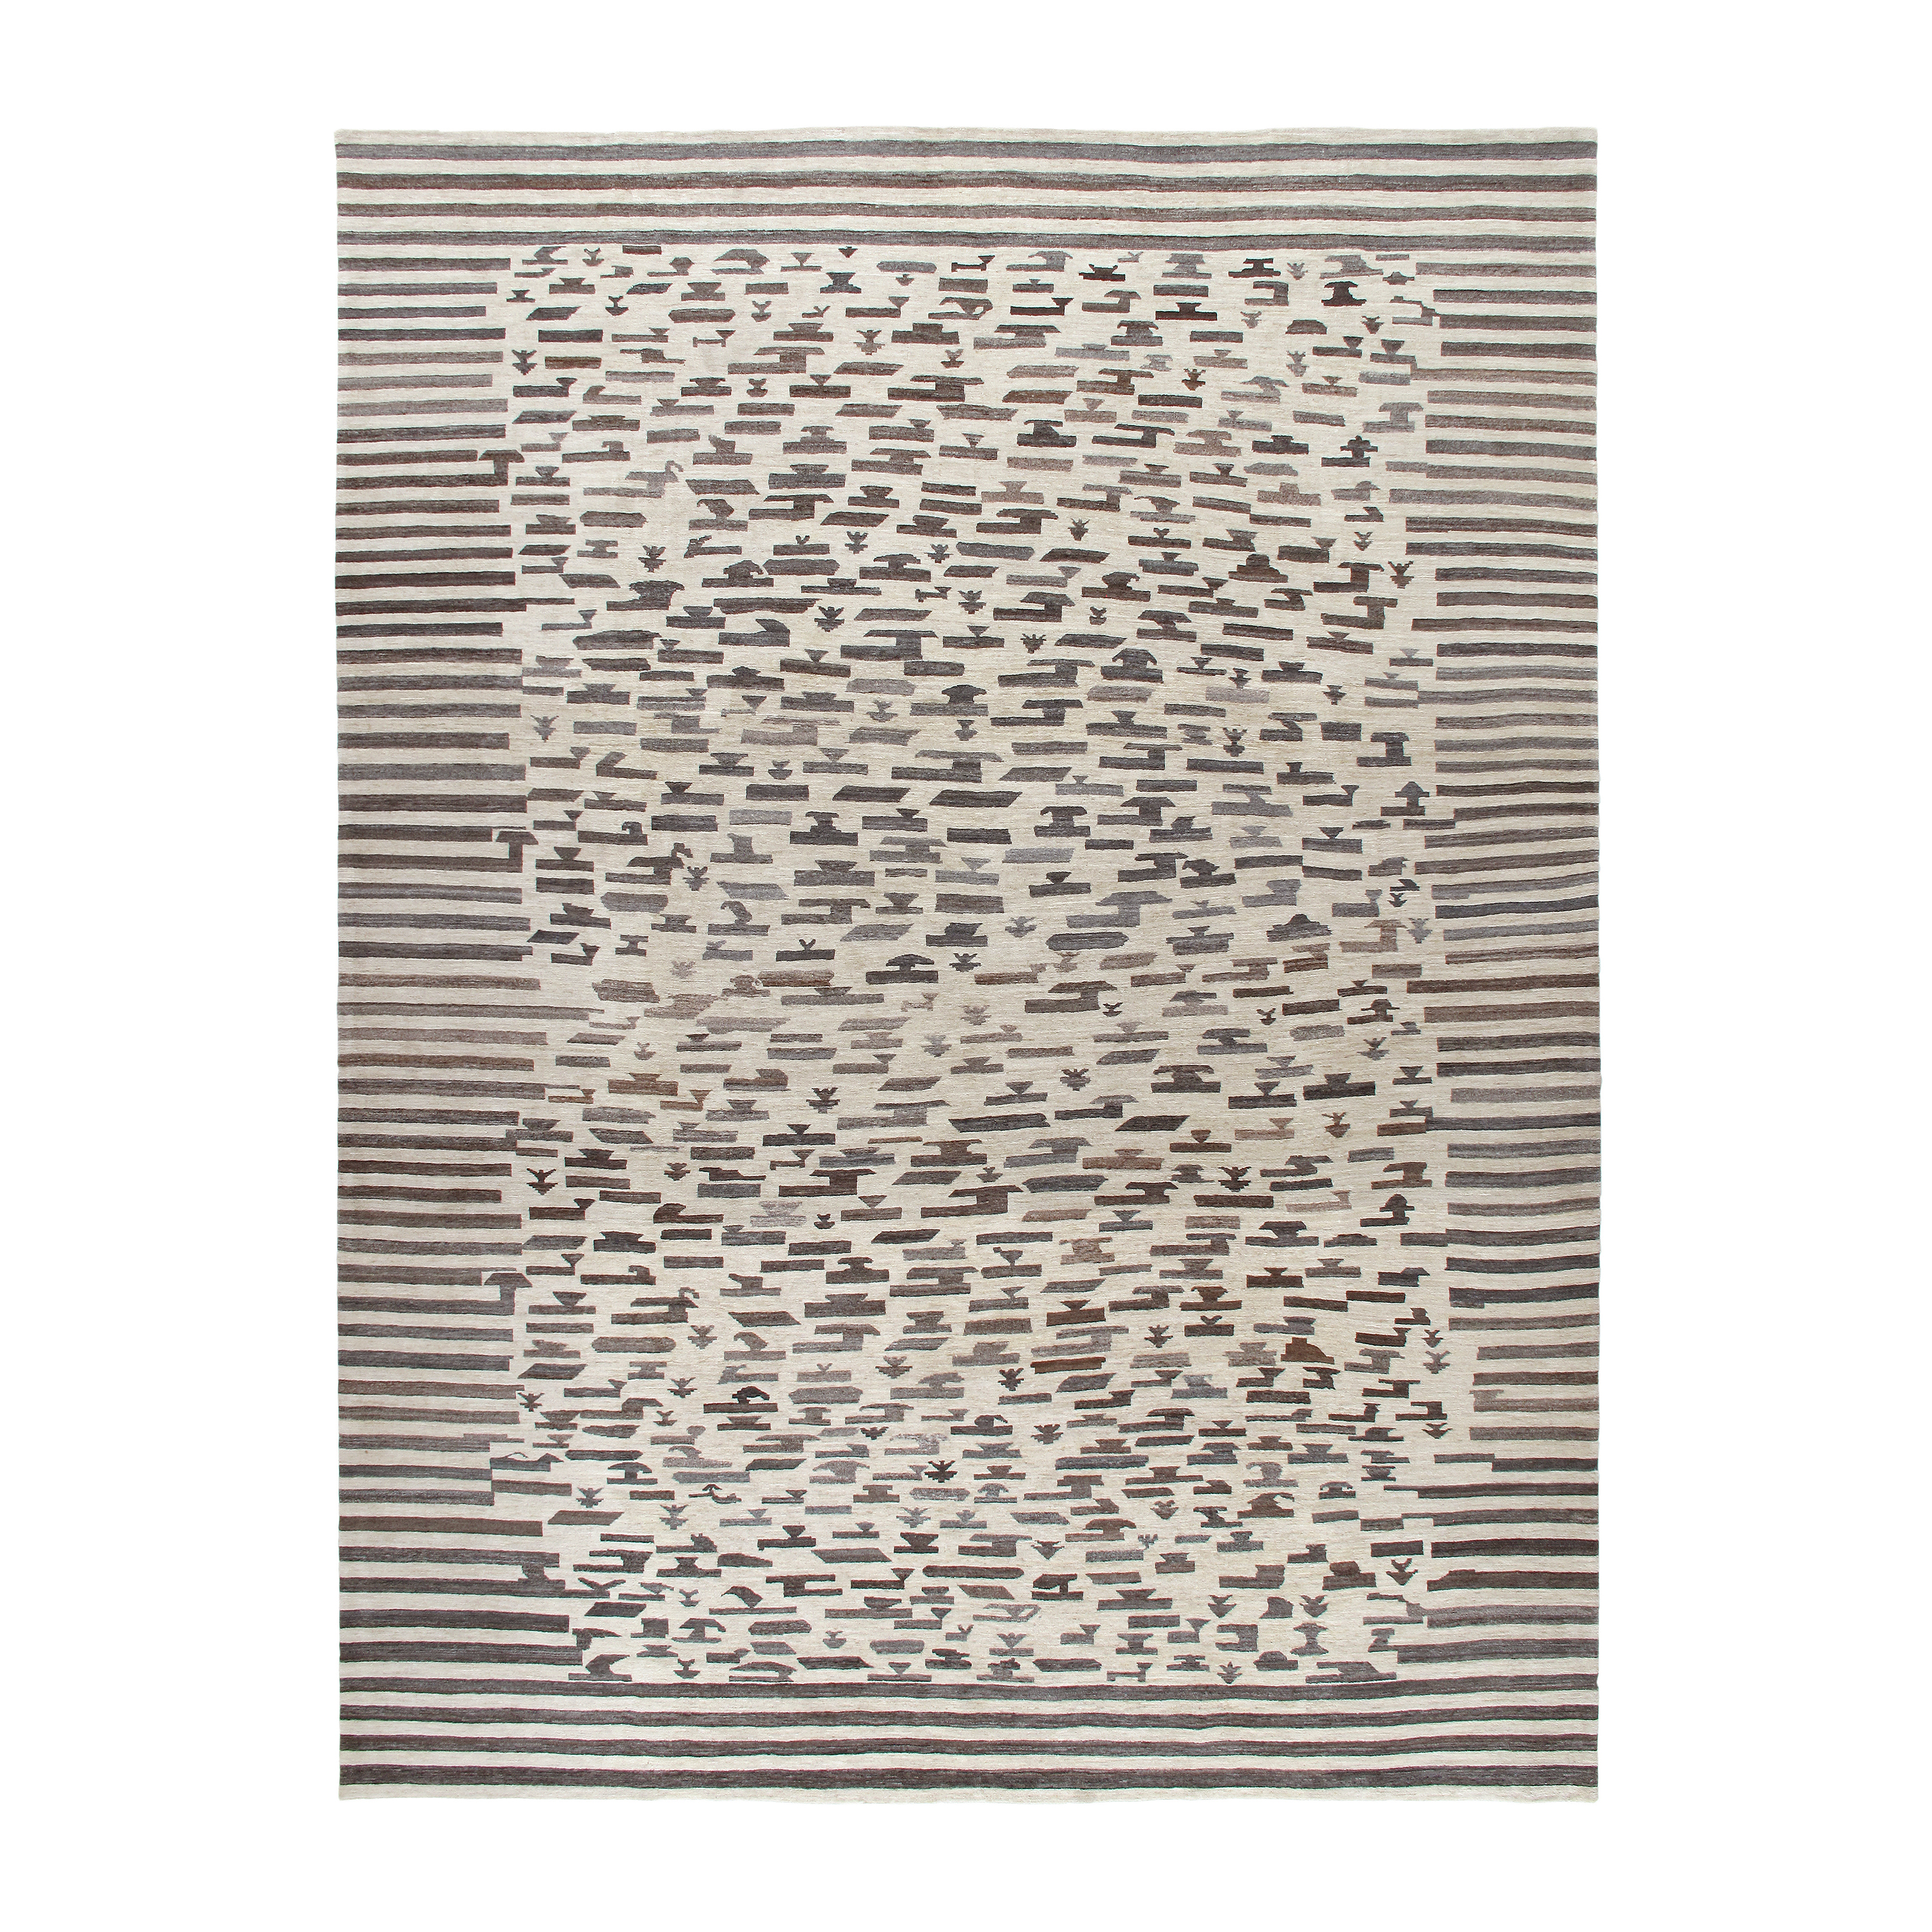 This Gabeh rug is  is made with 100% handspun, non-dyed or naturally dyed Persian wool.